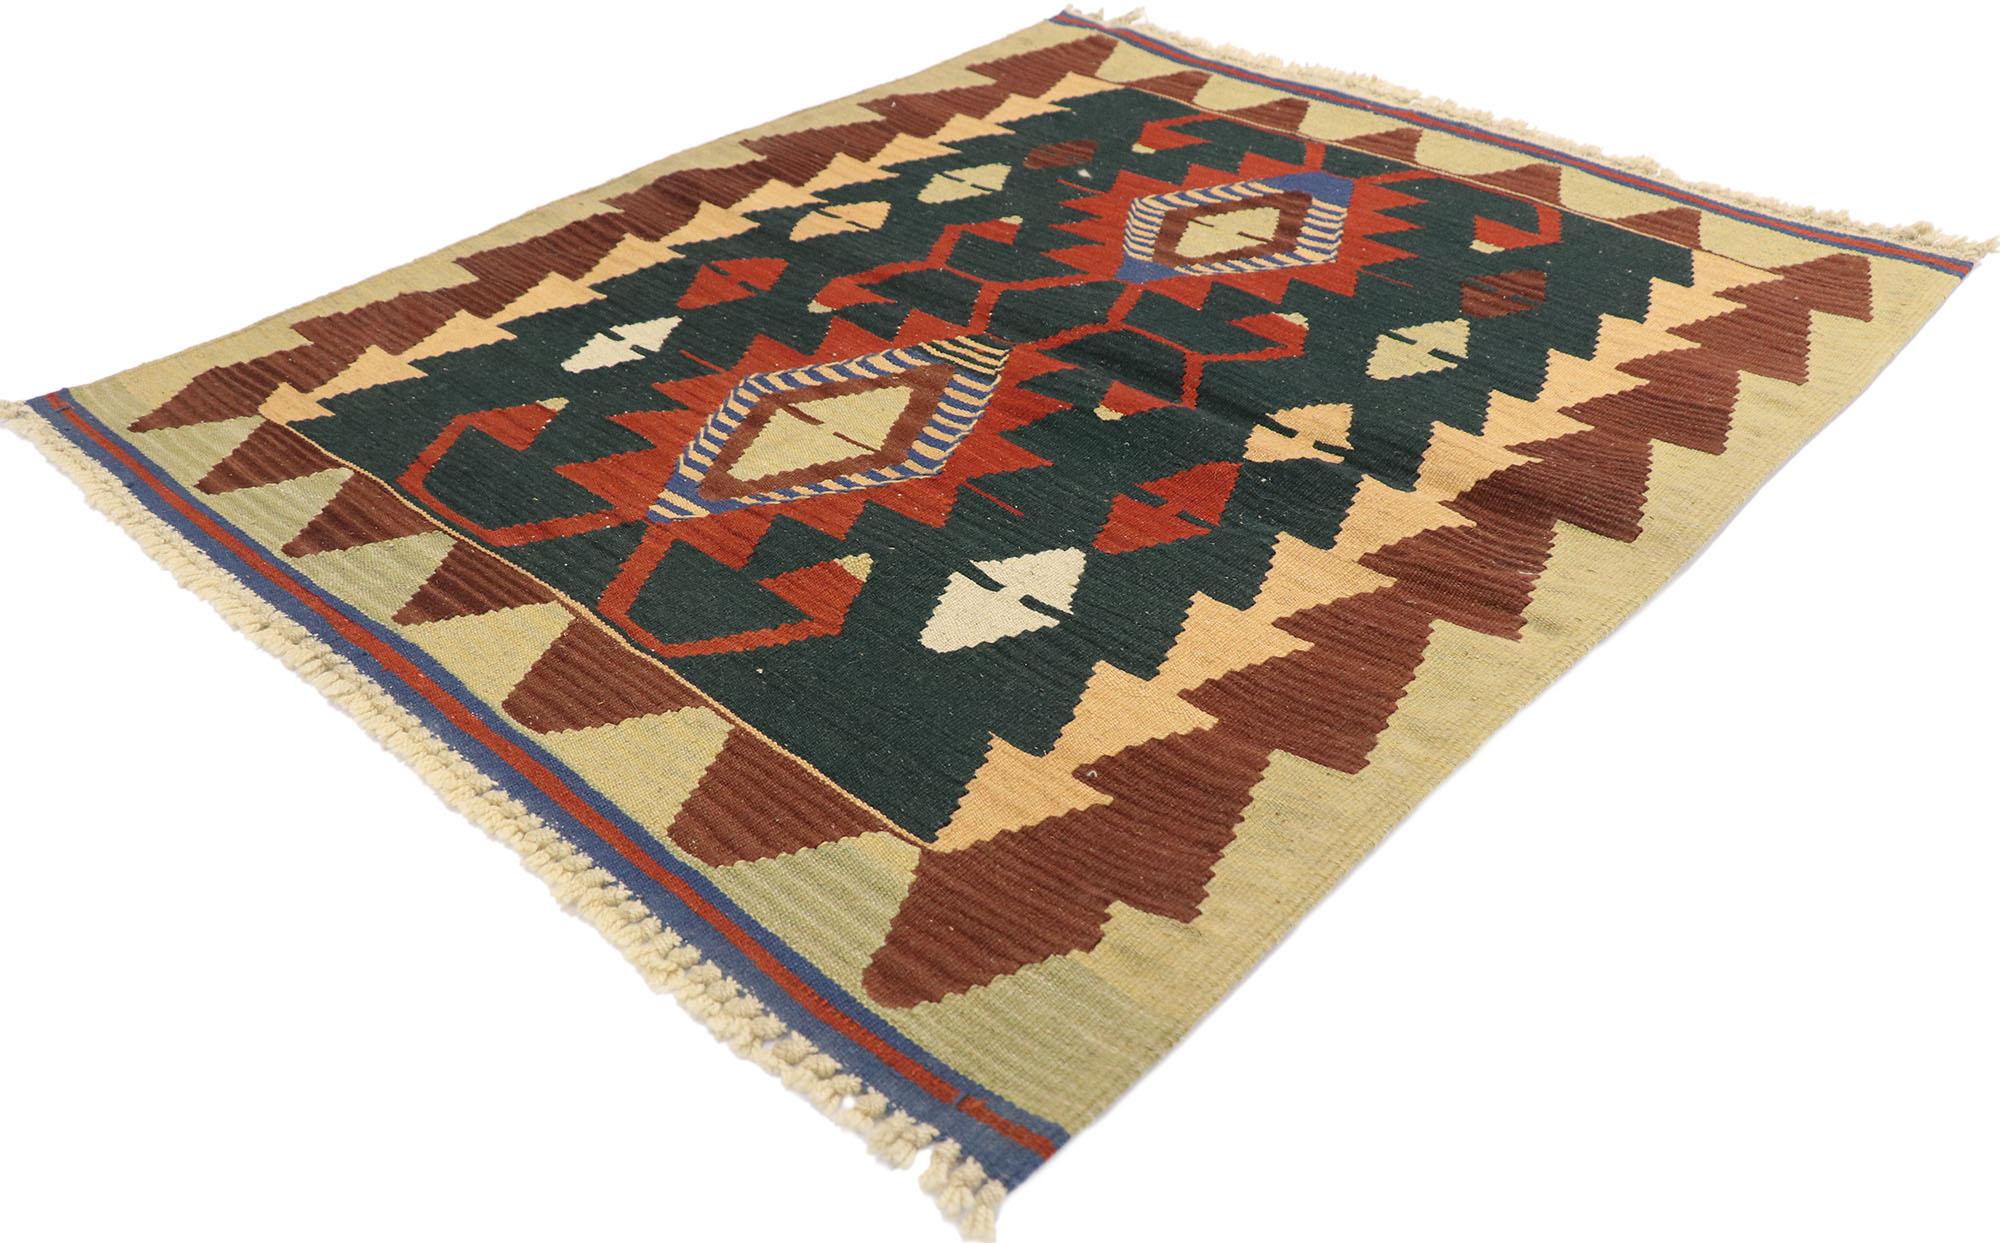 77972 Vintage Persian Shiraz Kilim rug with Tribal Style 03'02 x 03'08. Full of tiny details and a bold expressive design combined with warm colors and tribal style, this hand-woven wool vintage Persian Shiraz kilim rug is a captivating vision of